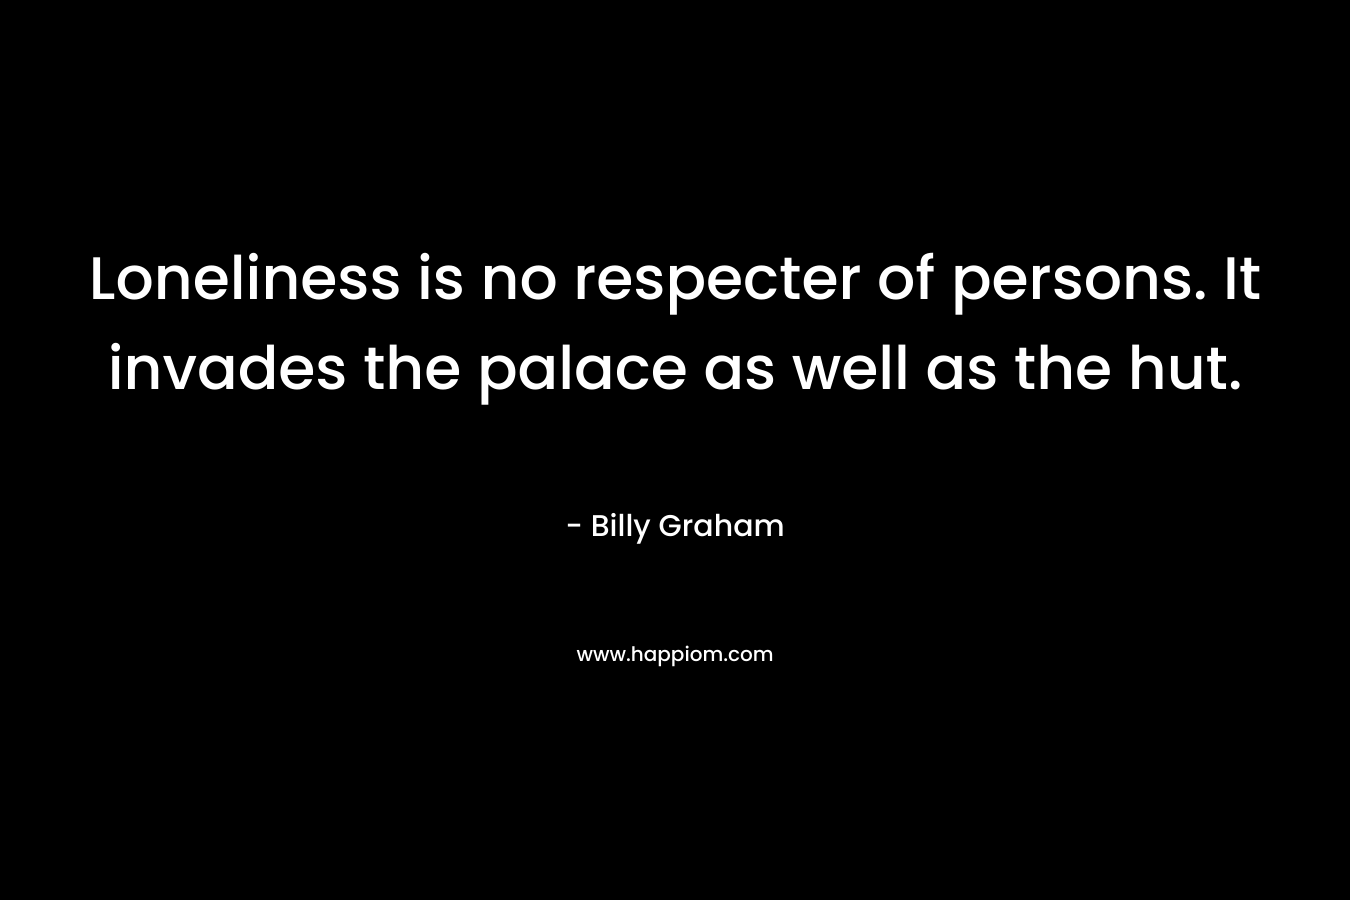 Loneliness is no respecter of persons. It invades the palace as well as the hut. – Billy Graham